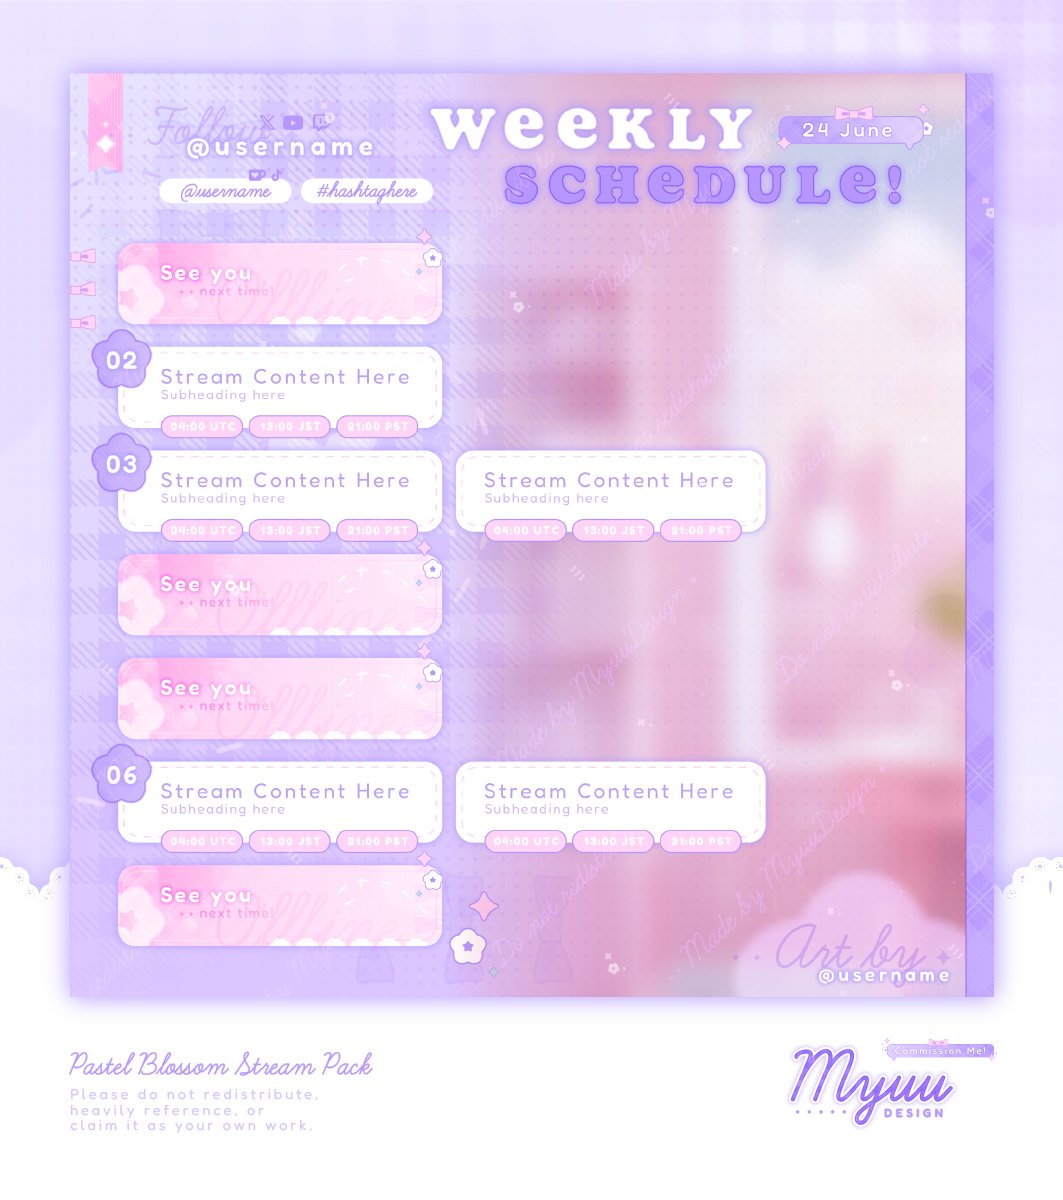 ༶ 𝐏𝟐𝐔 𝐒𝐭𝐫𝐞𝐚𝐦 𝐒𝐜𝐡𝐞𝐝𝐮𝐥𝐞 𝐂𝐨𝐦𝐢𝐧𝐠 𝐒𝐨𝐨𝐧 ༶
Part of my Pastel Blossom Stream Pack, I'll be launching it soon on my kofi~ Do you think it looks cute? (´▽`ʃƪ)♡

Give some love by giving ♡ & ↻ Tysm! (•ᴗ<˶)✧₊ ⊹
#Vtuber #VTuberAssets